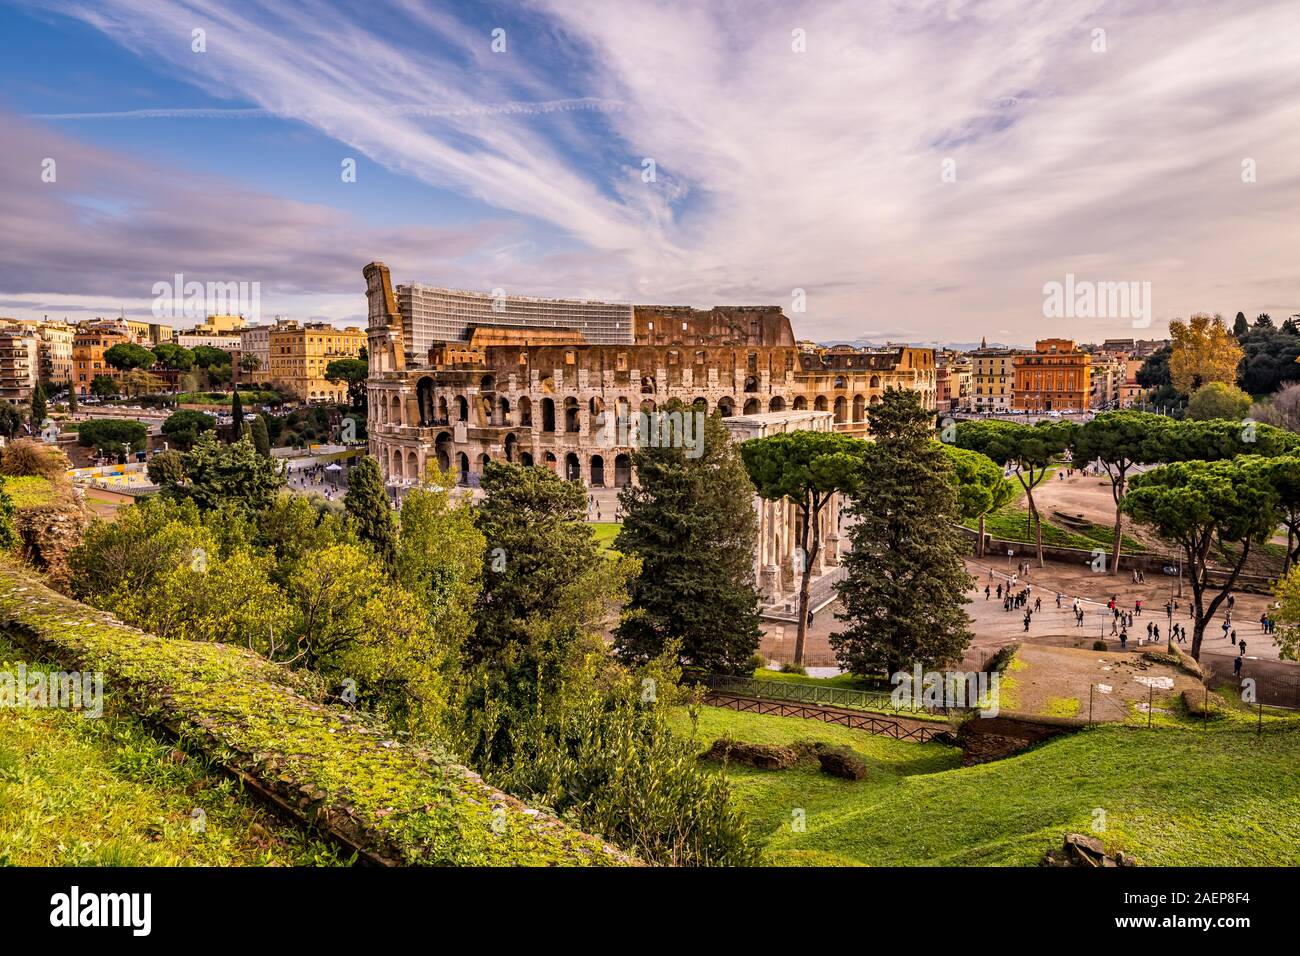 Beautiful Daylight Colosseum in Rome, cloudy, Italy Stock Photo